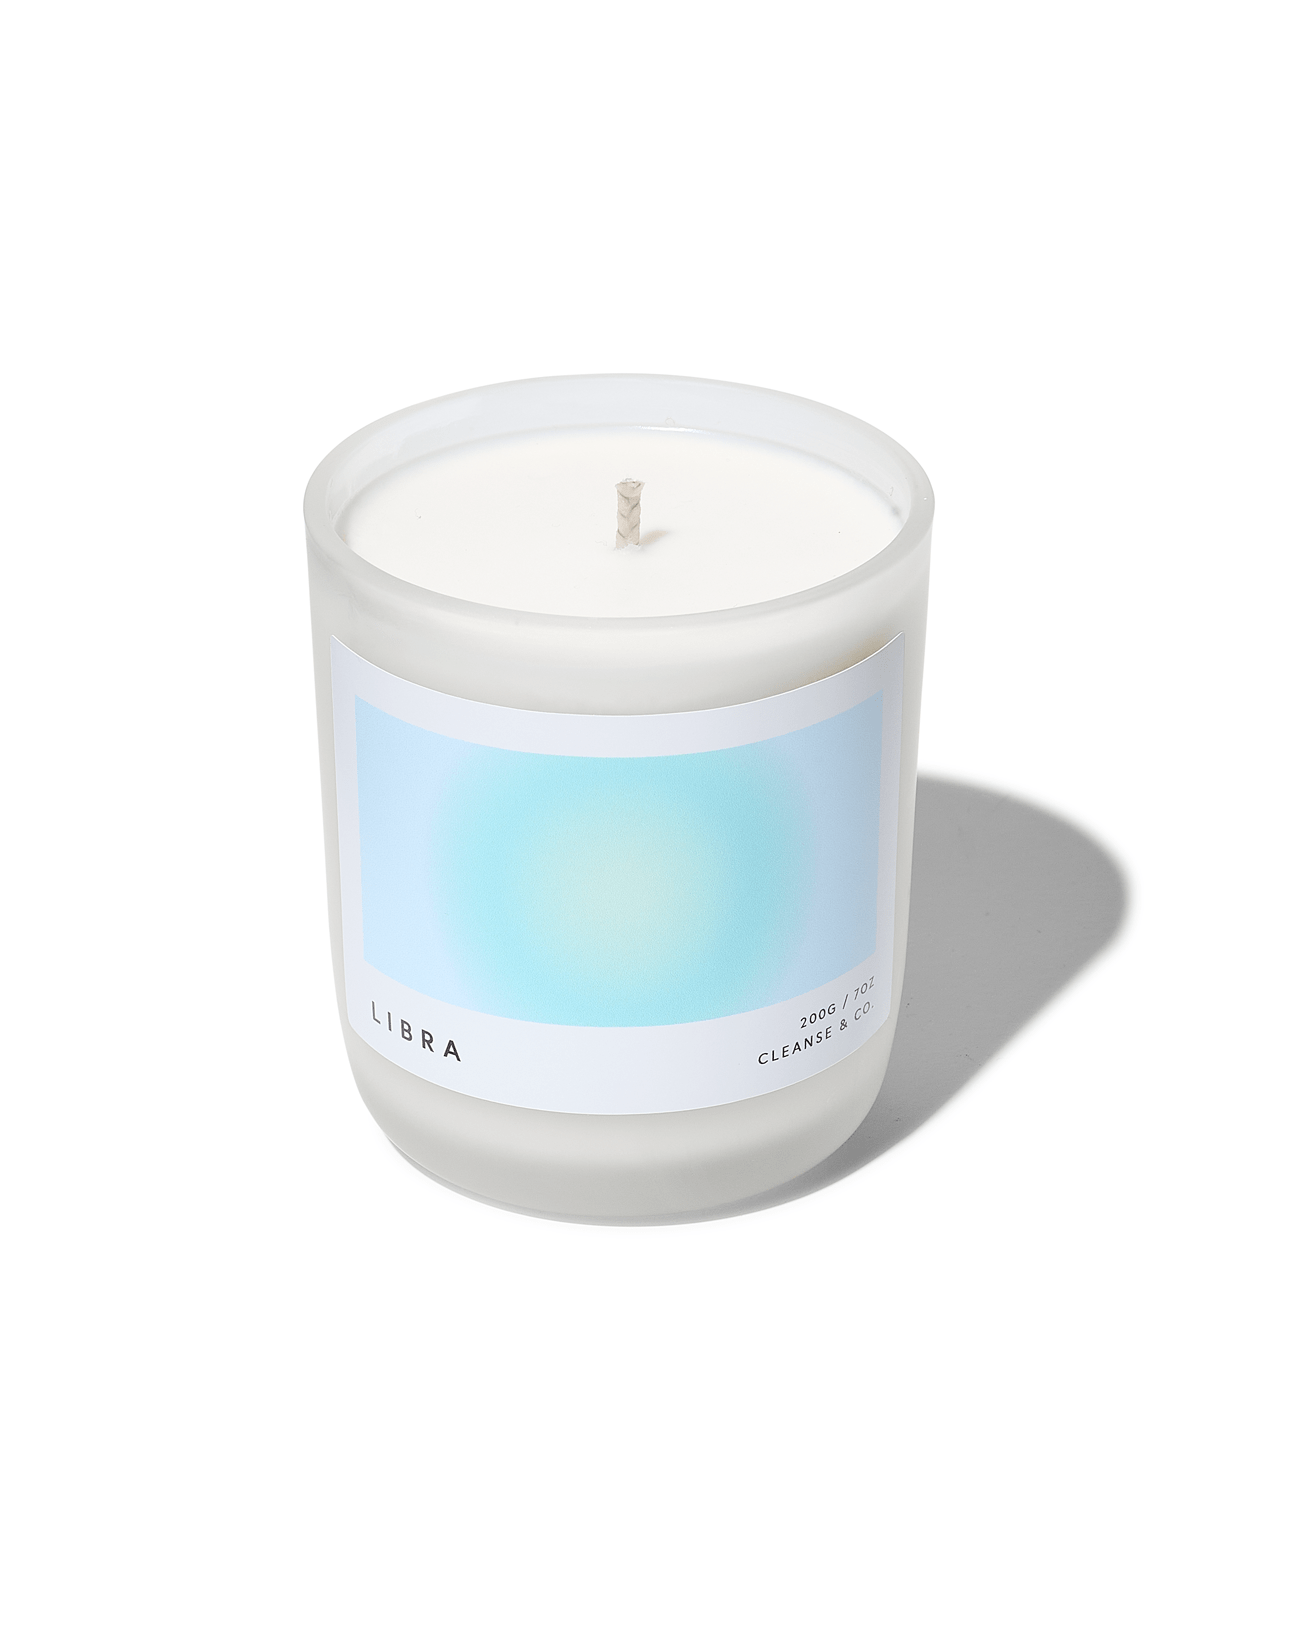 Libra - Aura Candle: 200G / Unscented by Cleanse & Co.